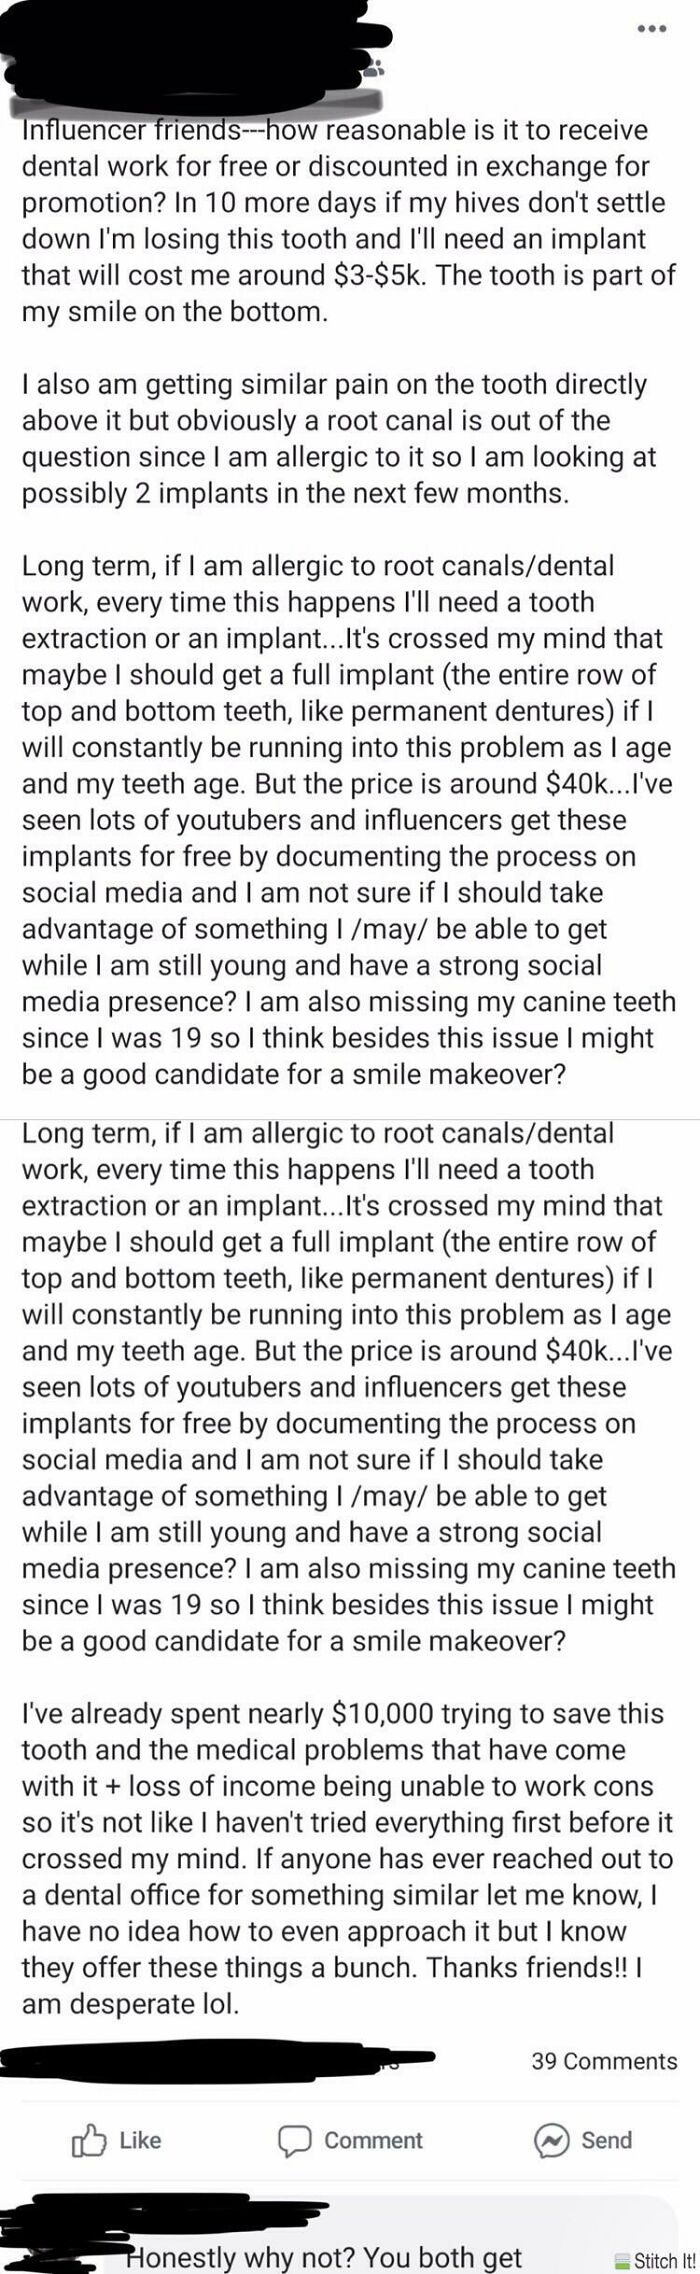 Trying To Pay For A 40k Medical Procedure Using Influence With People In The Comments Thinking This Is Justified And Reasonable.